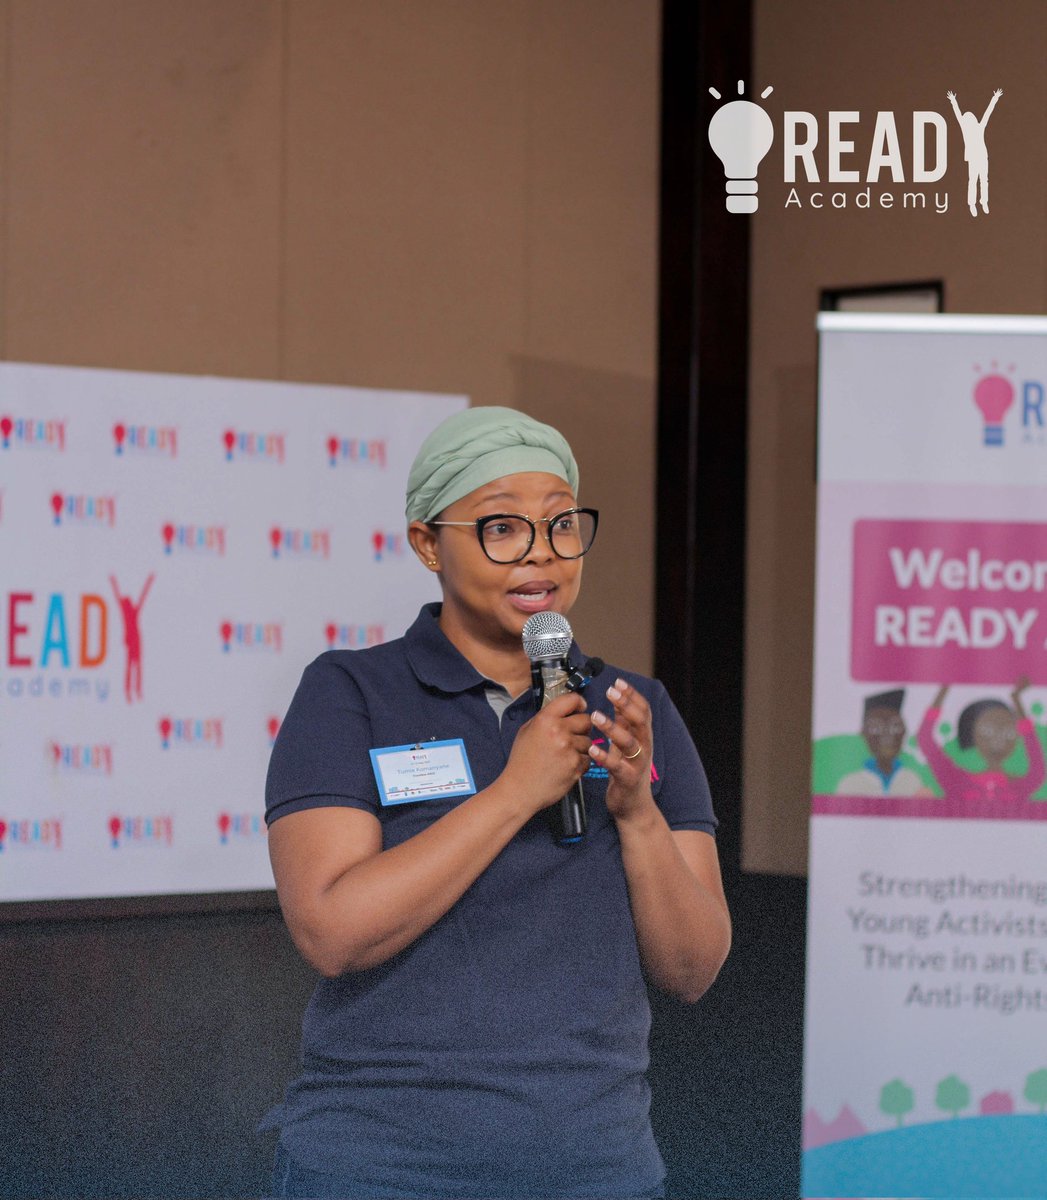 At the opening session for READY Academy 2.0 We heard from @TumieKomanyane from @frontlineaids the leading organization of the #READYMovement She gave a background on the movement and it's importance in promoting youth leadership in SRHR and HIV.